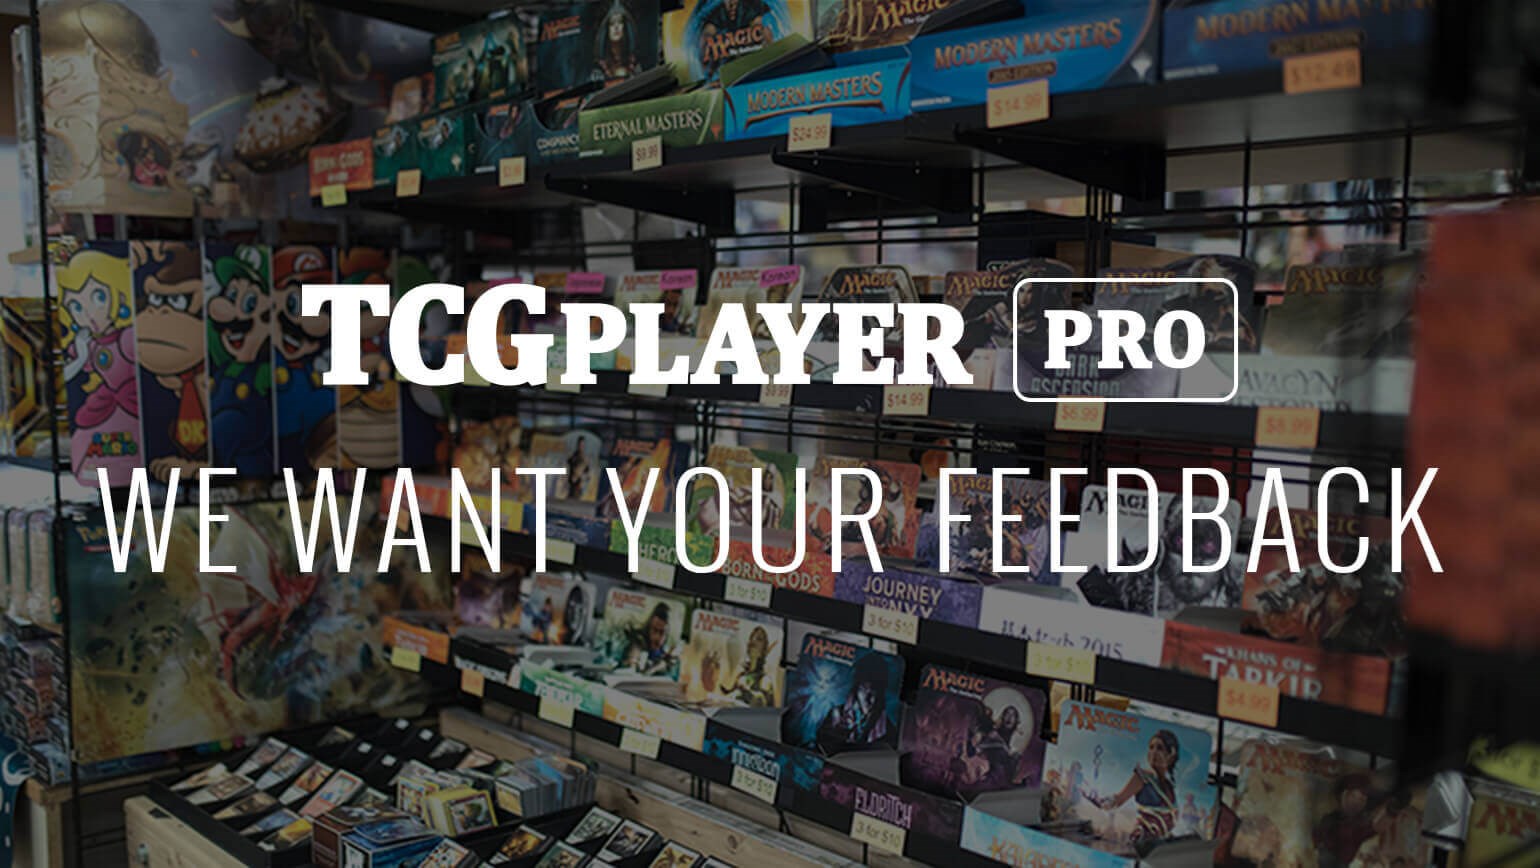 We Want Your Feedback on Your Pro Website